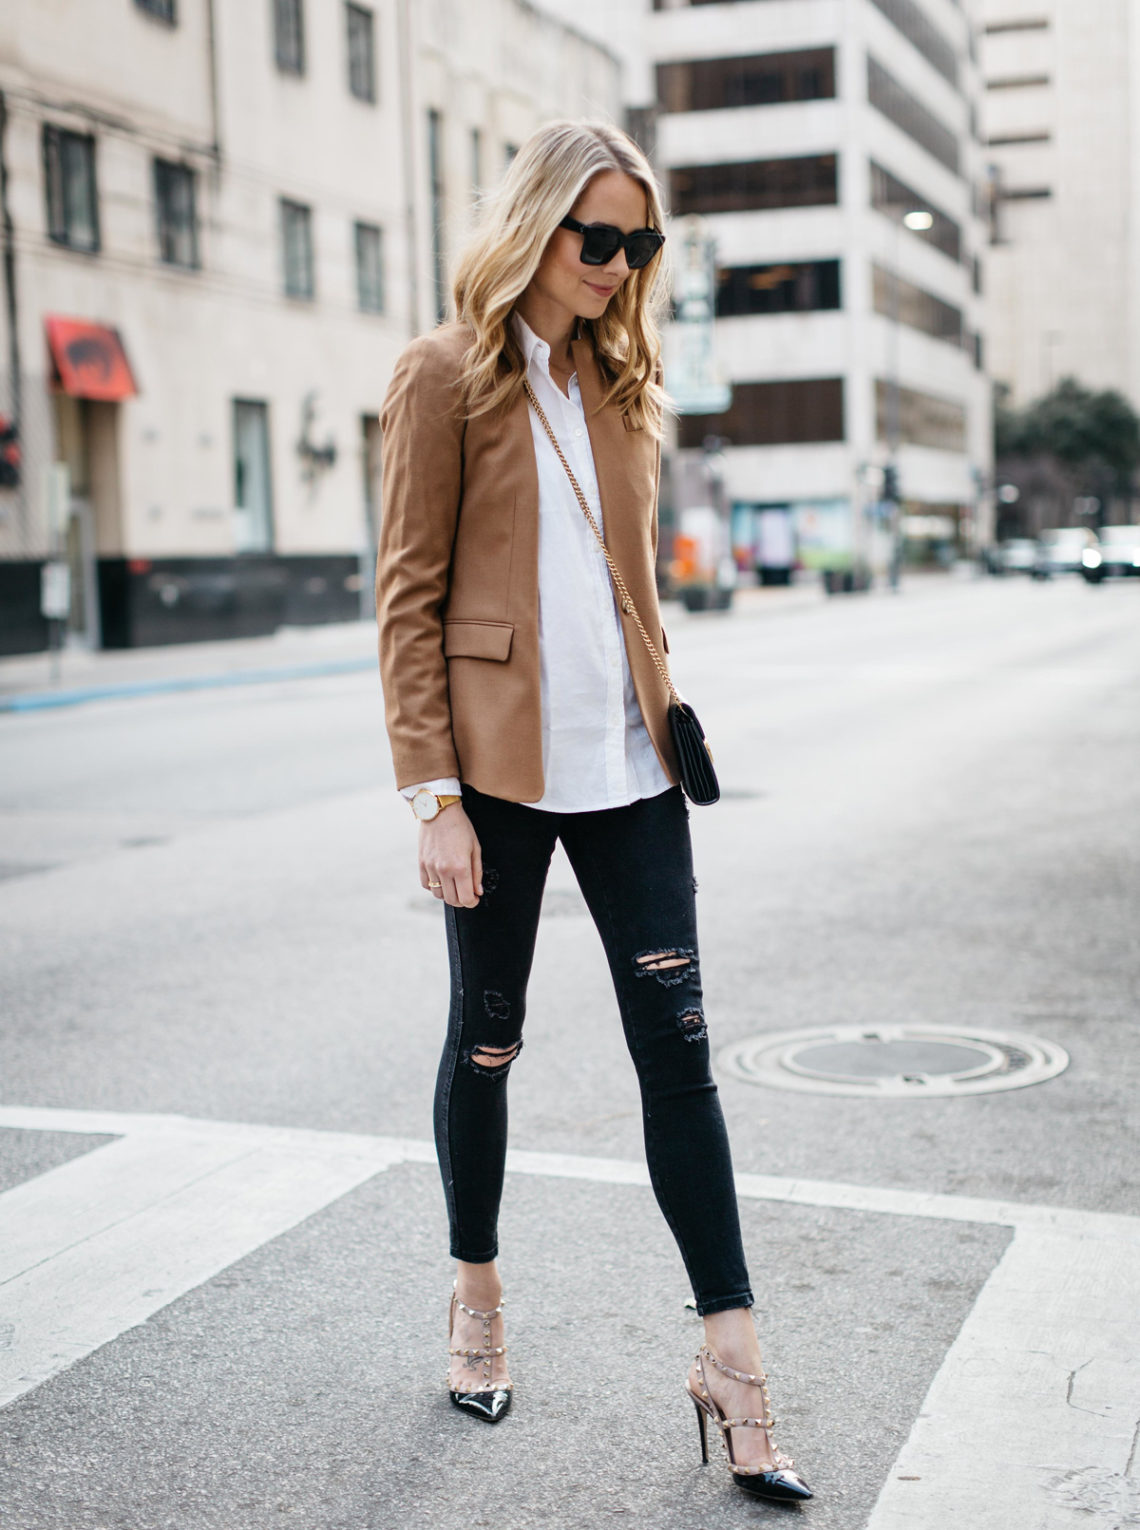 Fall Outfit, Winter Outfit, White Button-Down Shirt, Camel Blazer, Gucci Marmont Handbag, Black Ripped Skinny Jeans, Valentino Rockstud Pumps